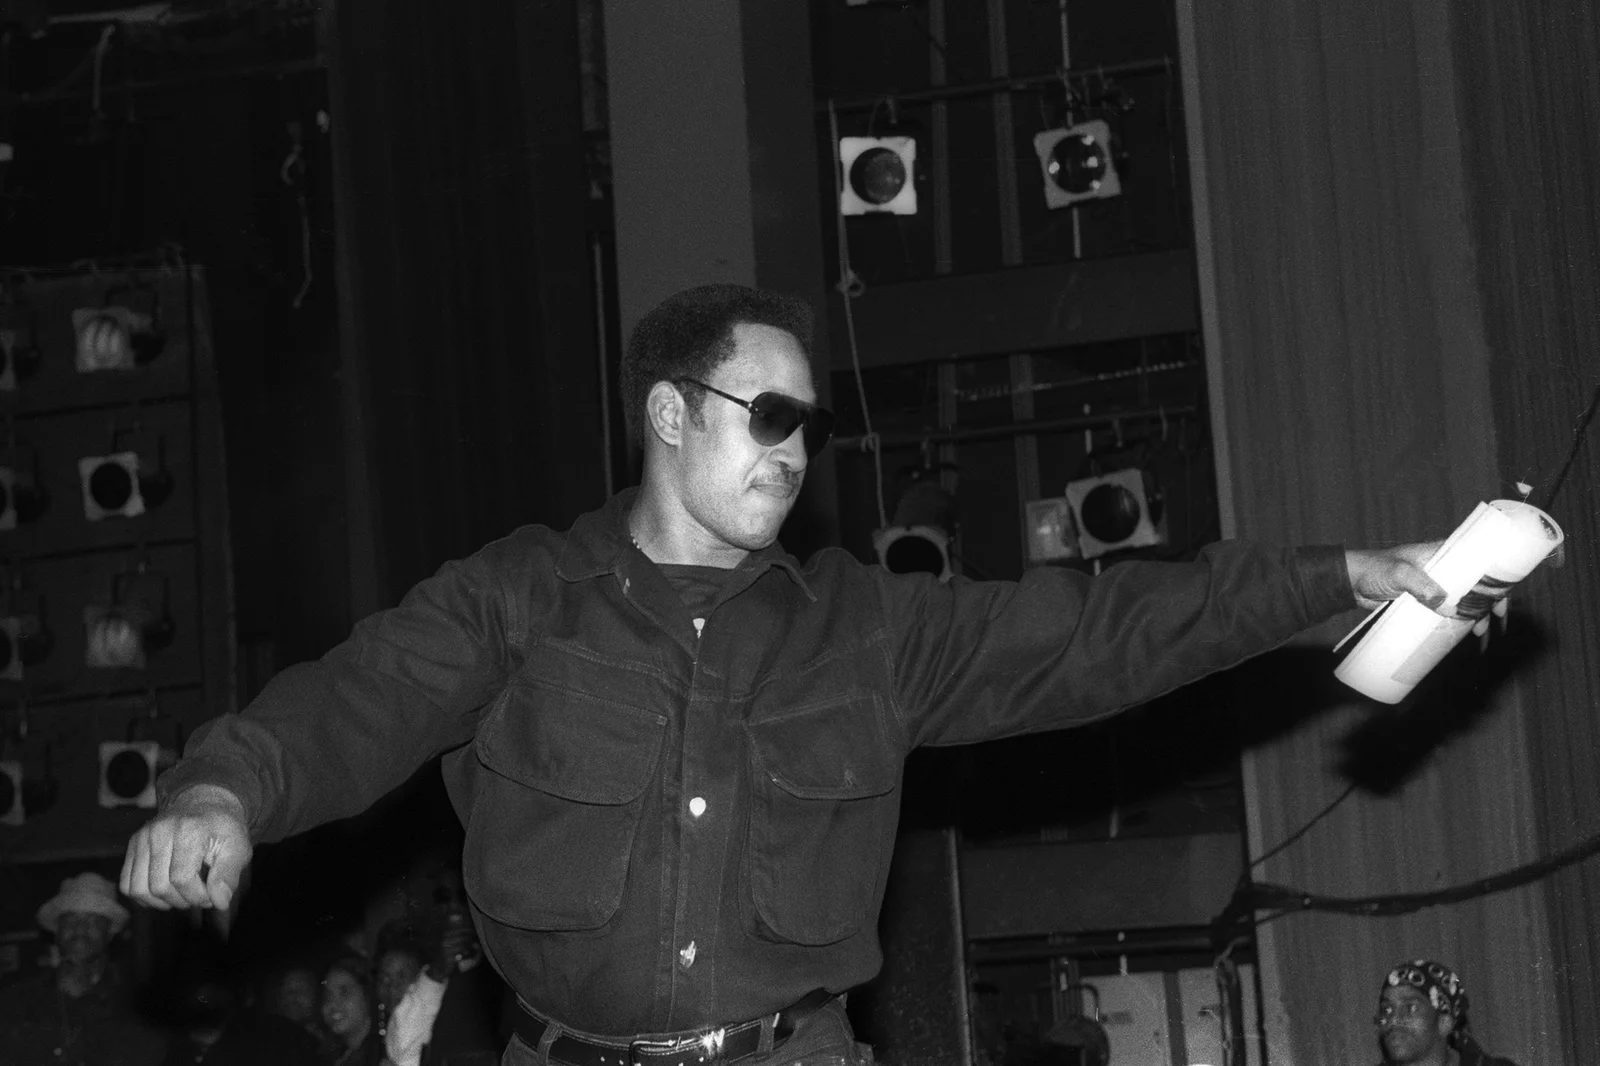 A black and white image of DJ Kool Herc. He is wearing sunglasses and behind him there is a stand of speakers. 